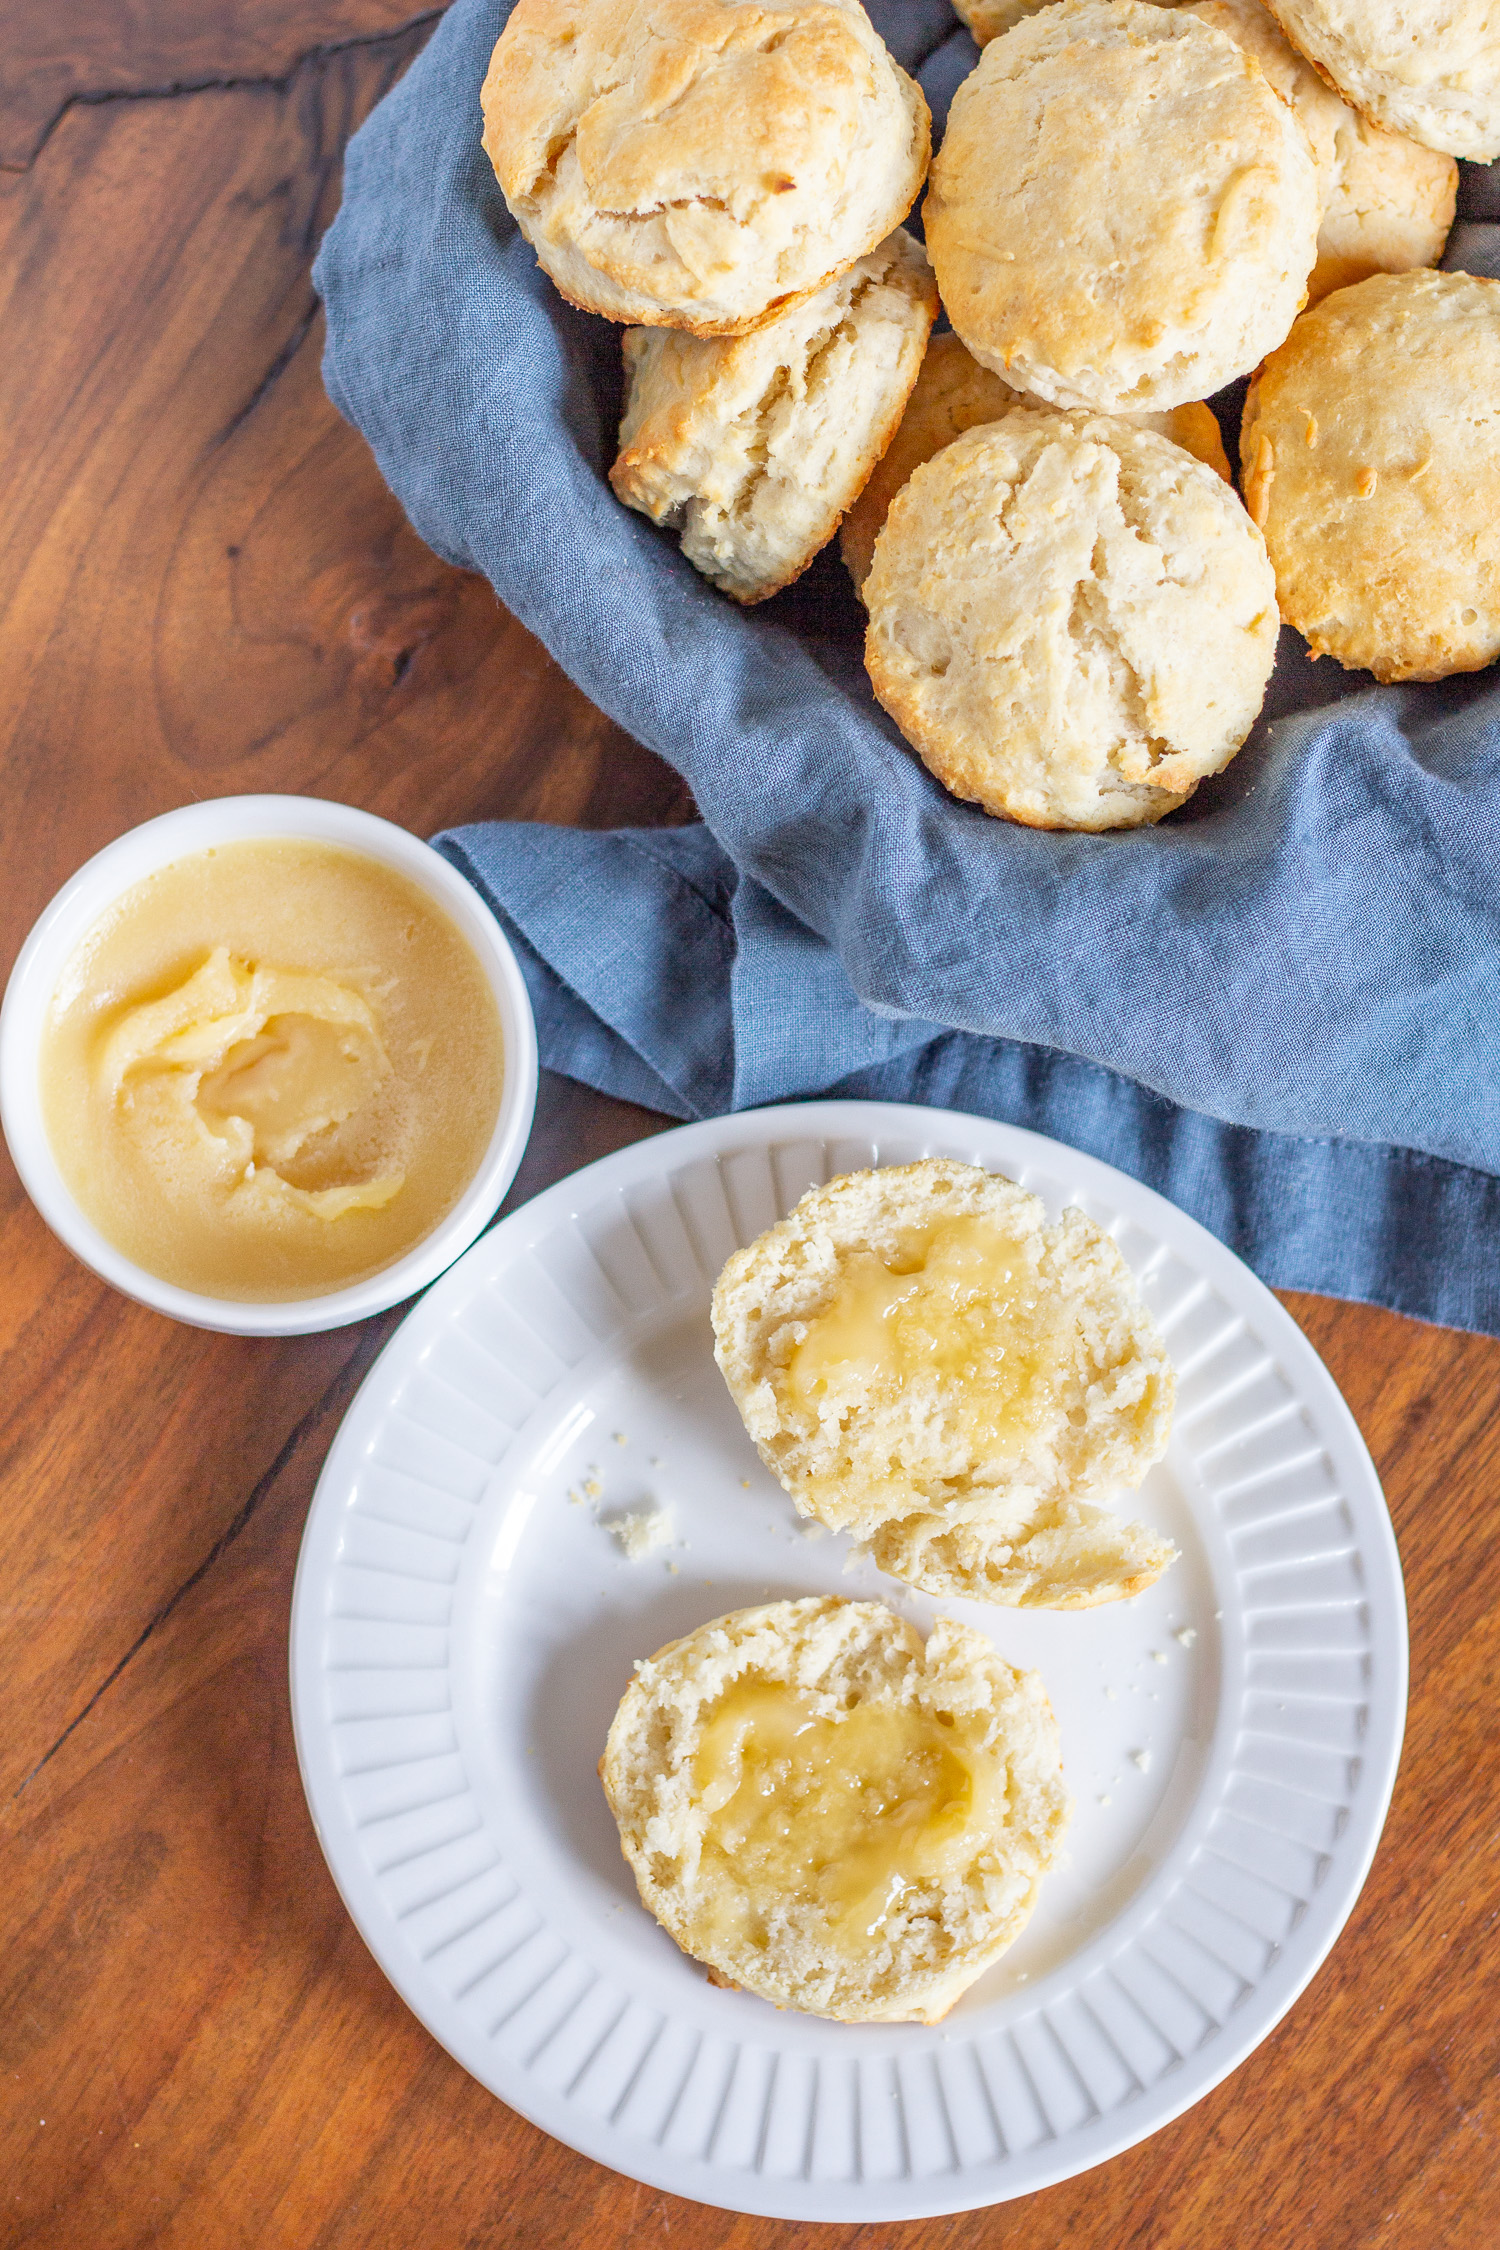 How to Make Biscuits The Easiest Biscuit Recipe